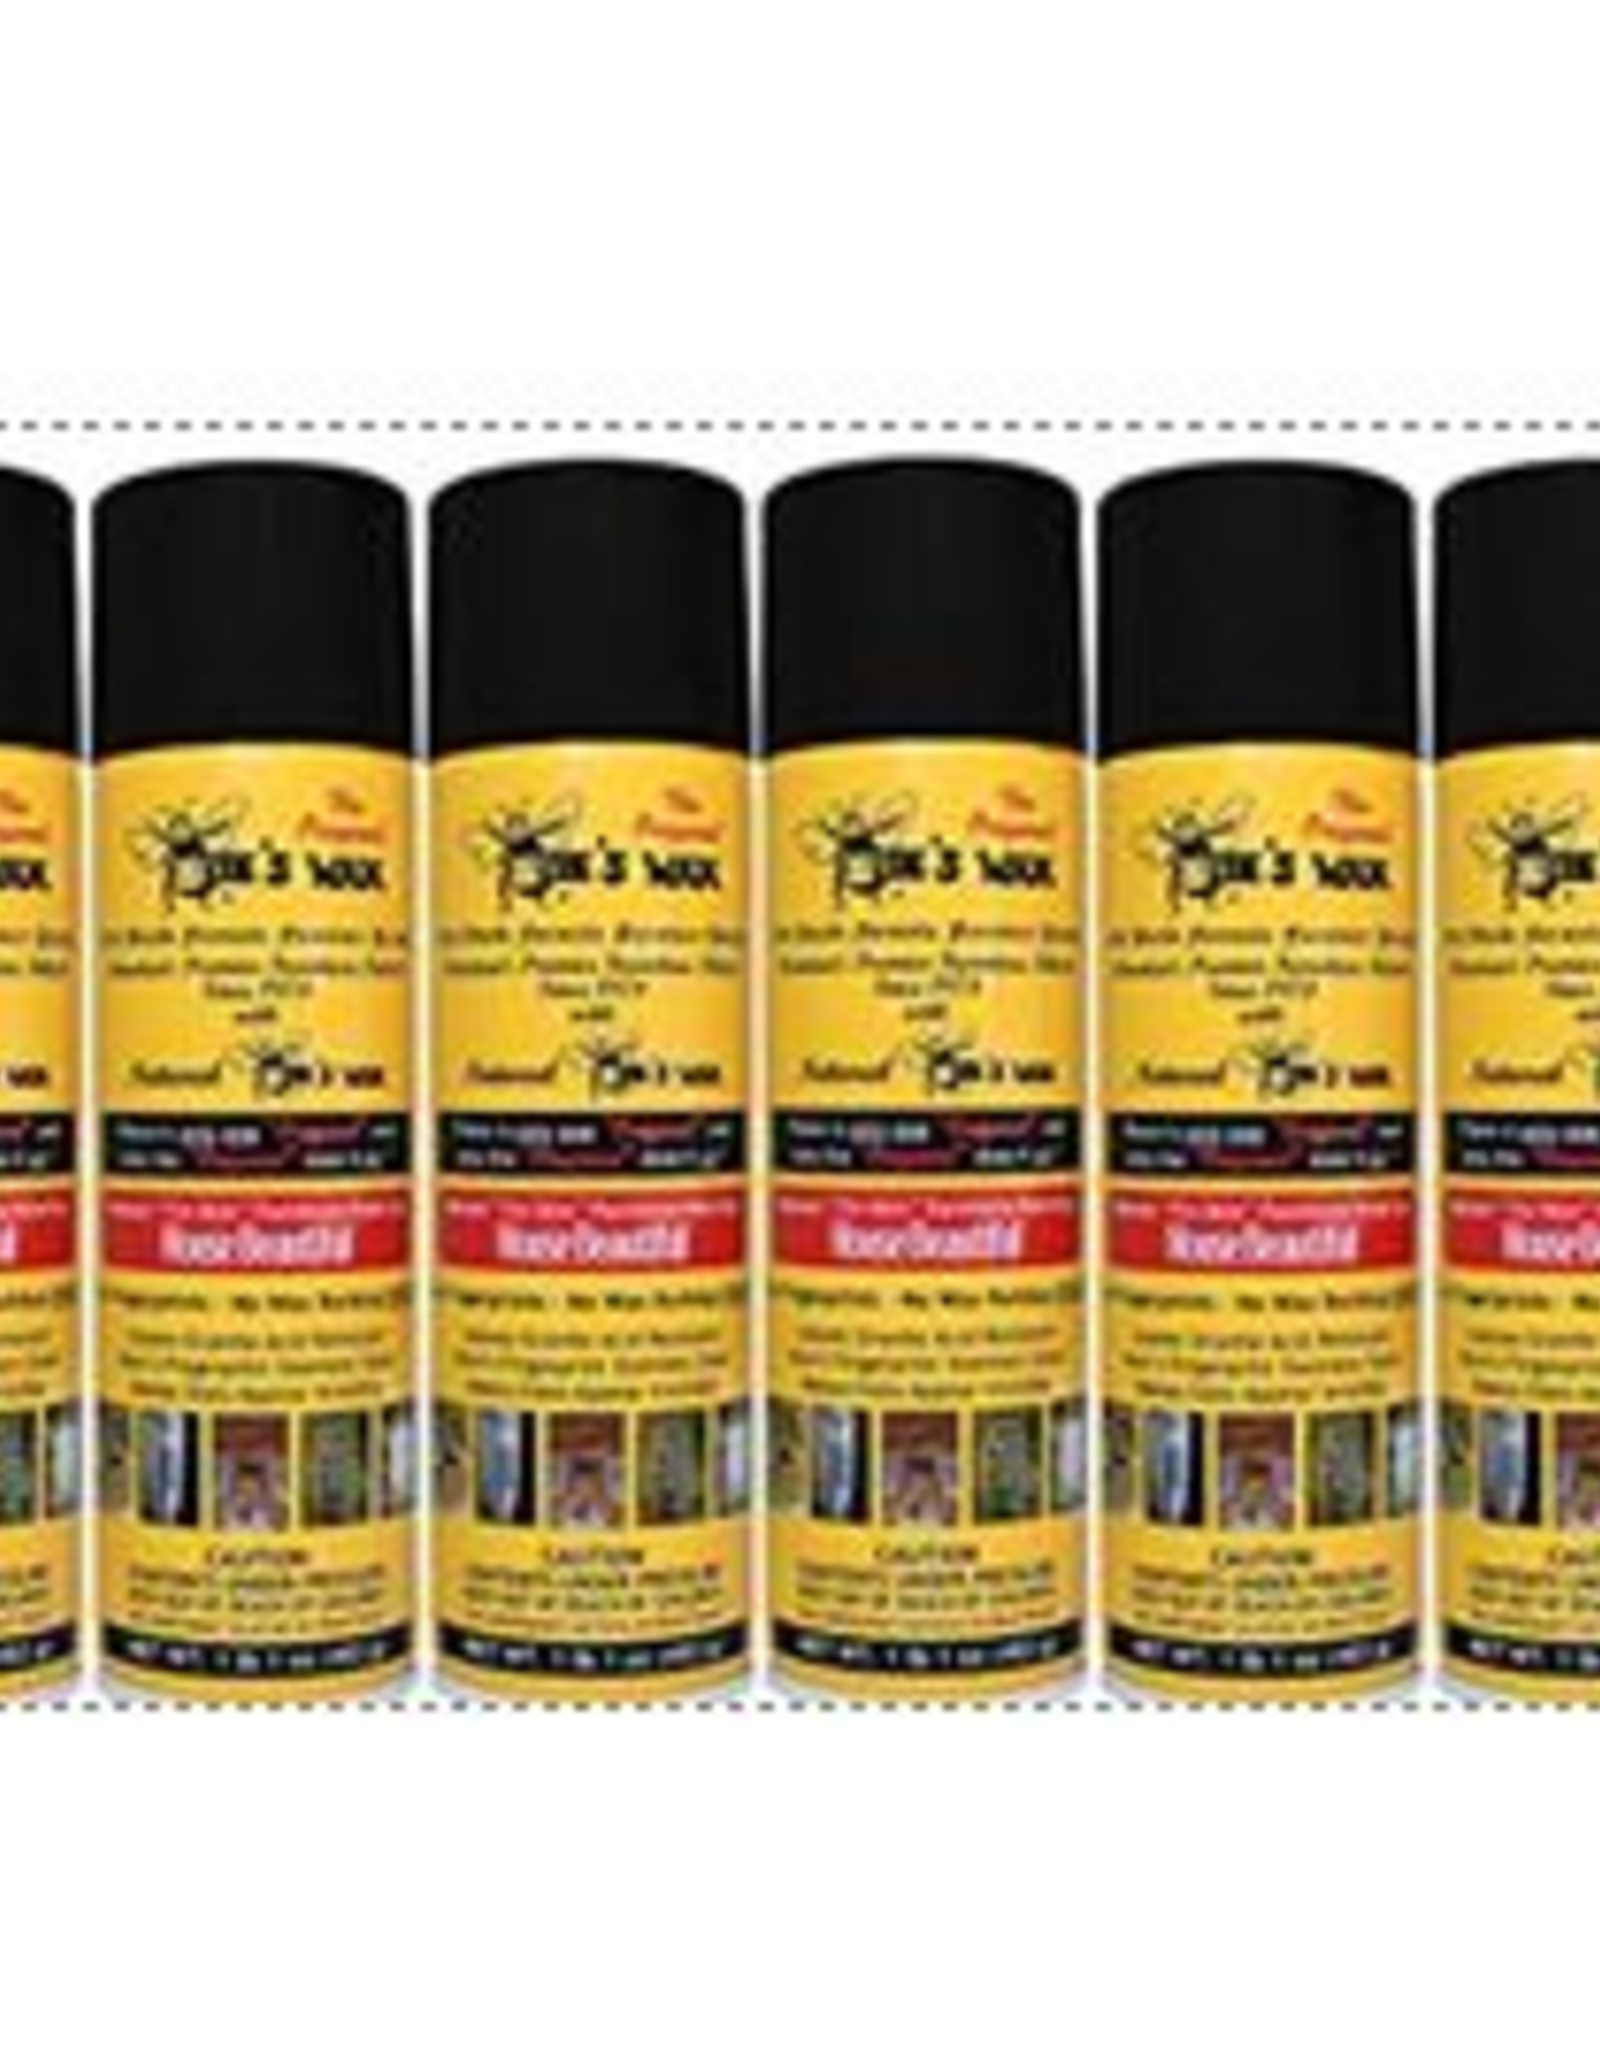 Original Bee's Wax 6pk - Cleary Brothers Vacuum, Janitorial